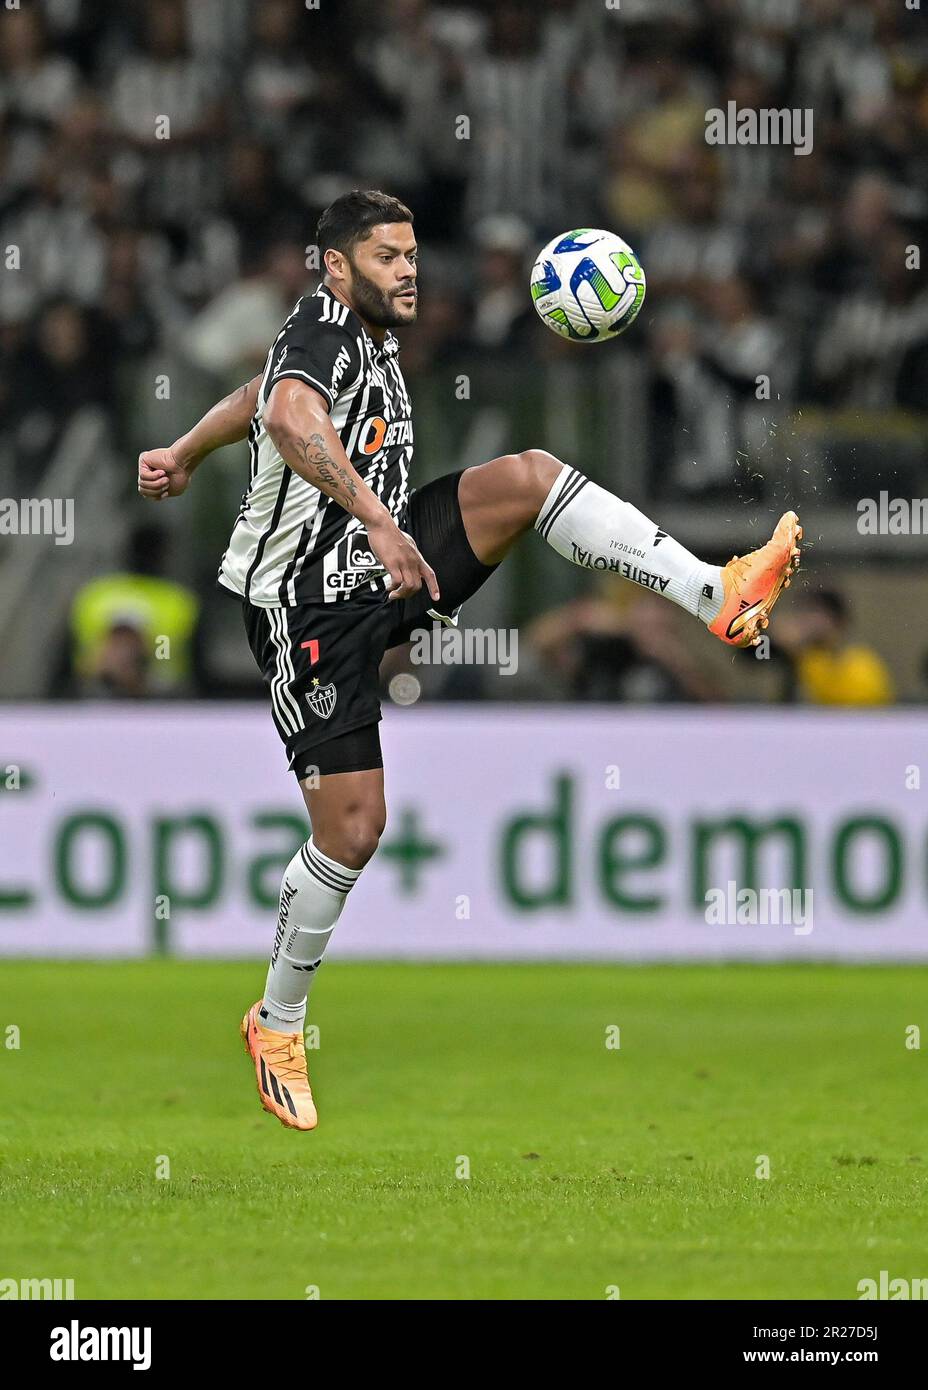 Belo Horizonte, Brazil. 17th May, 2023. Hulk of Atletico Mineiro, during the match between Atletico Mineiro and Corinthians, for the Brazil Cup 2023, at Mineirao Stadium, in Belo Horizonte on May 17. Photo: Gledston Tavares/ Credit: DiaEsportivo/Alamy Live News Stock Photo